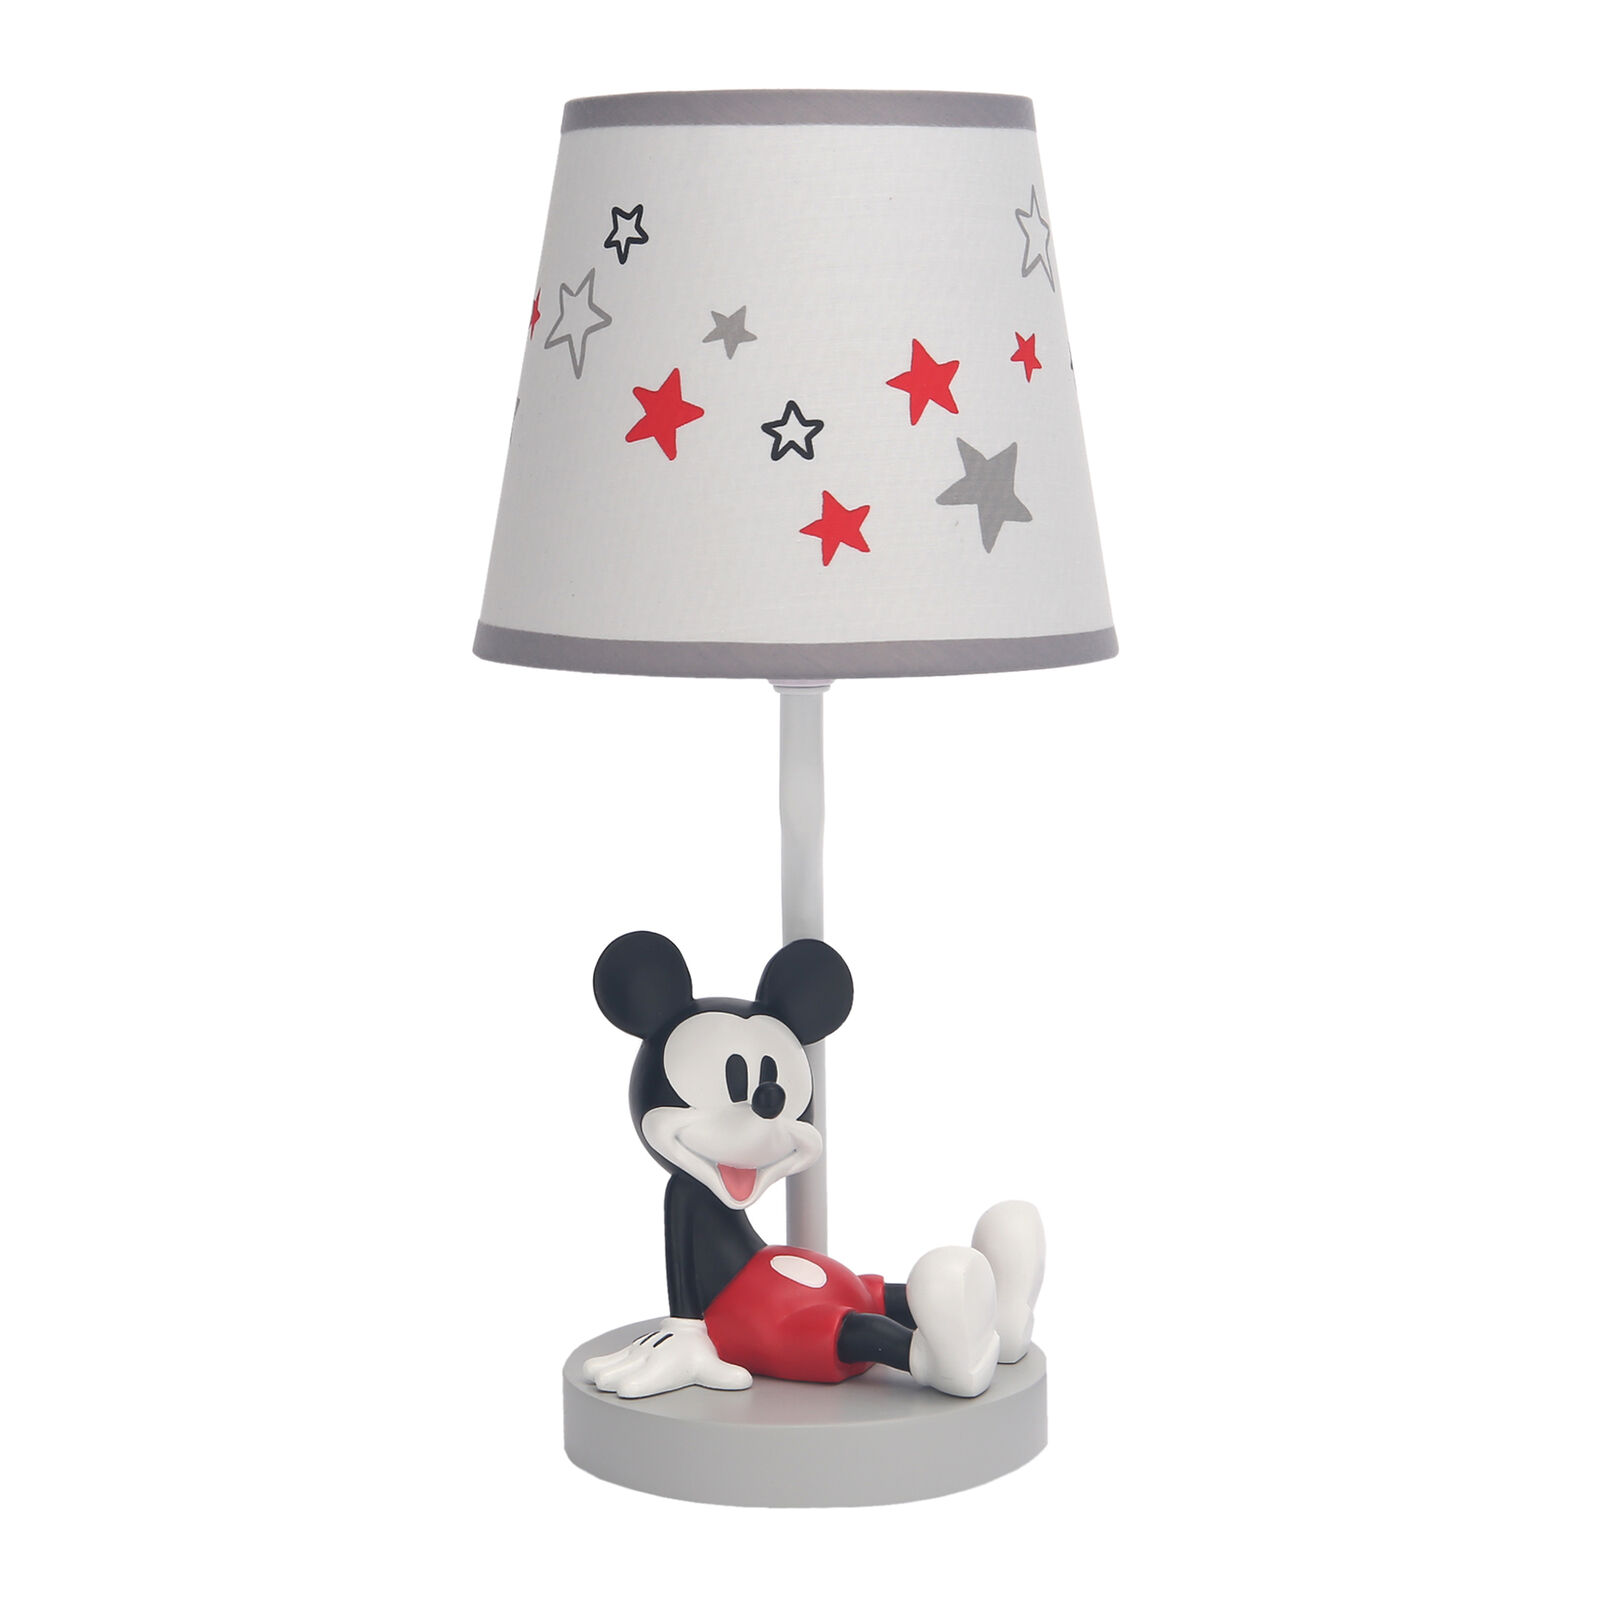 Lambs & Ivy Disney Baby Magical Mickey Mouse Lamp With Shade And Bulb - Gray